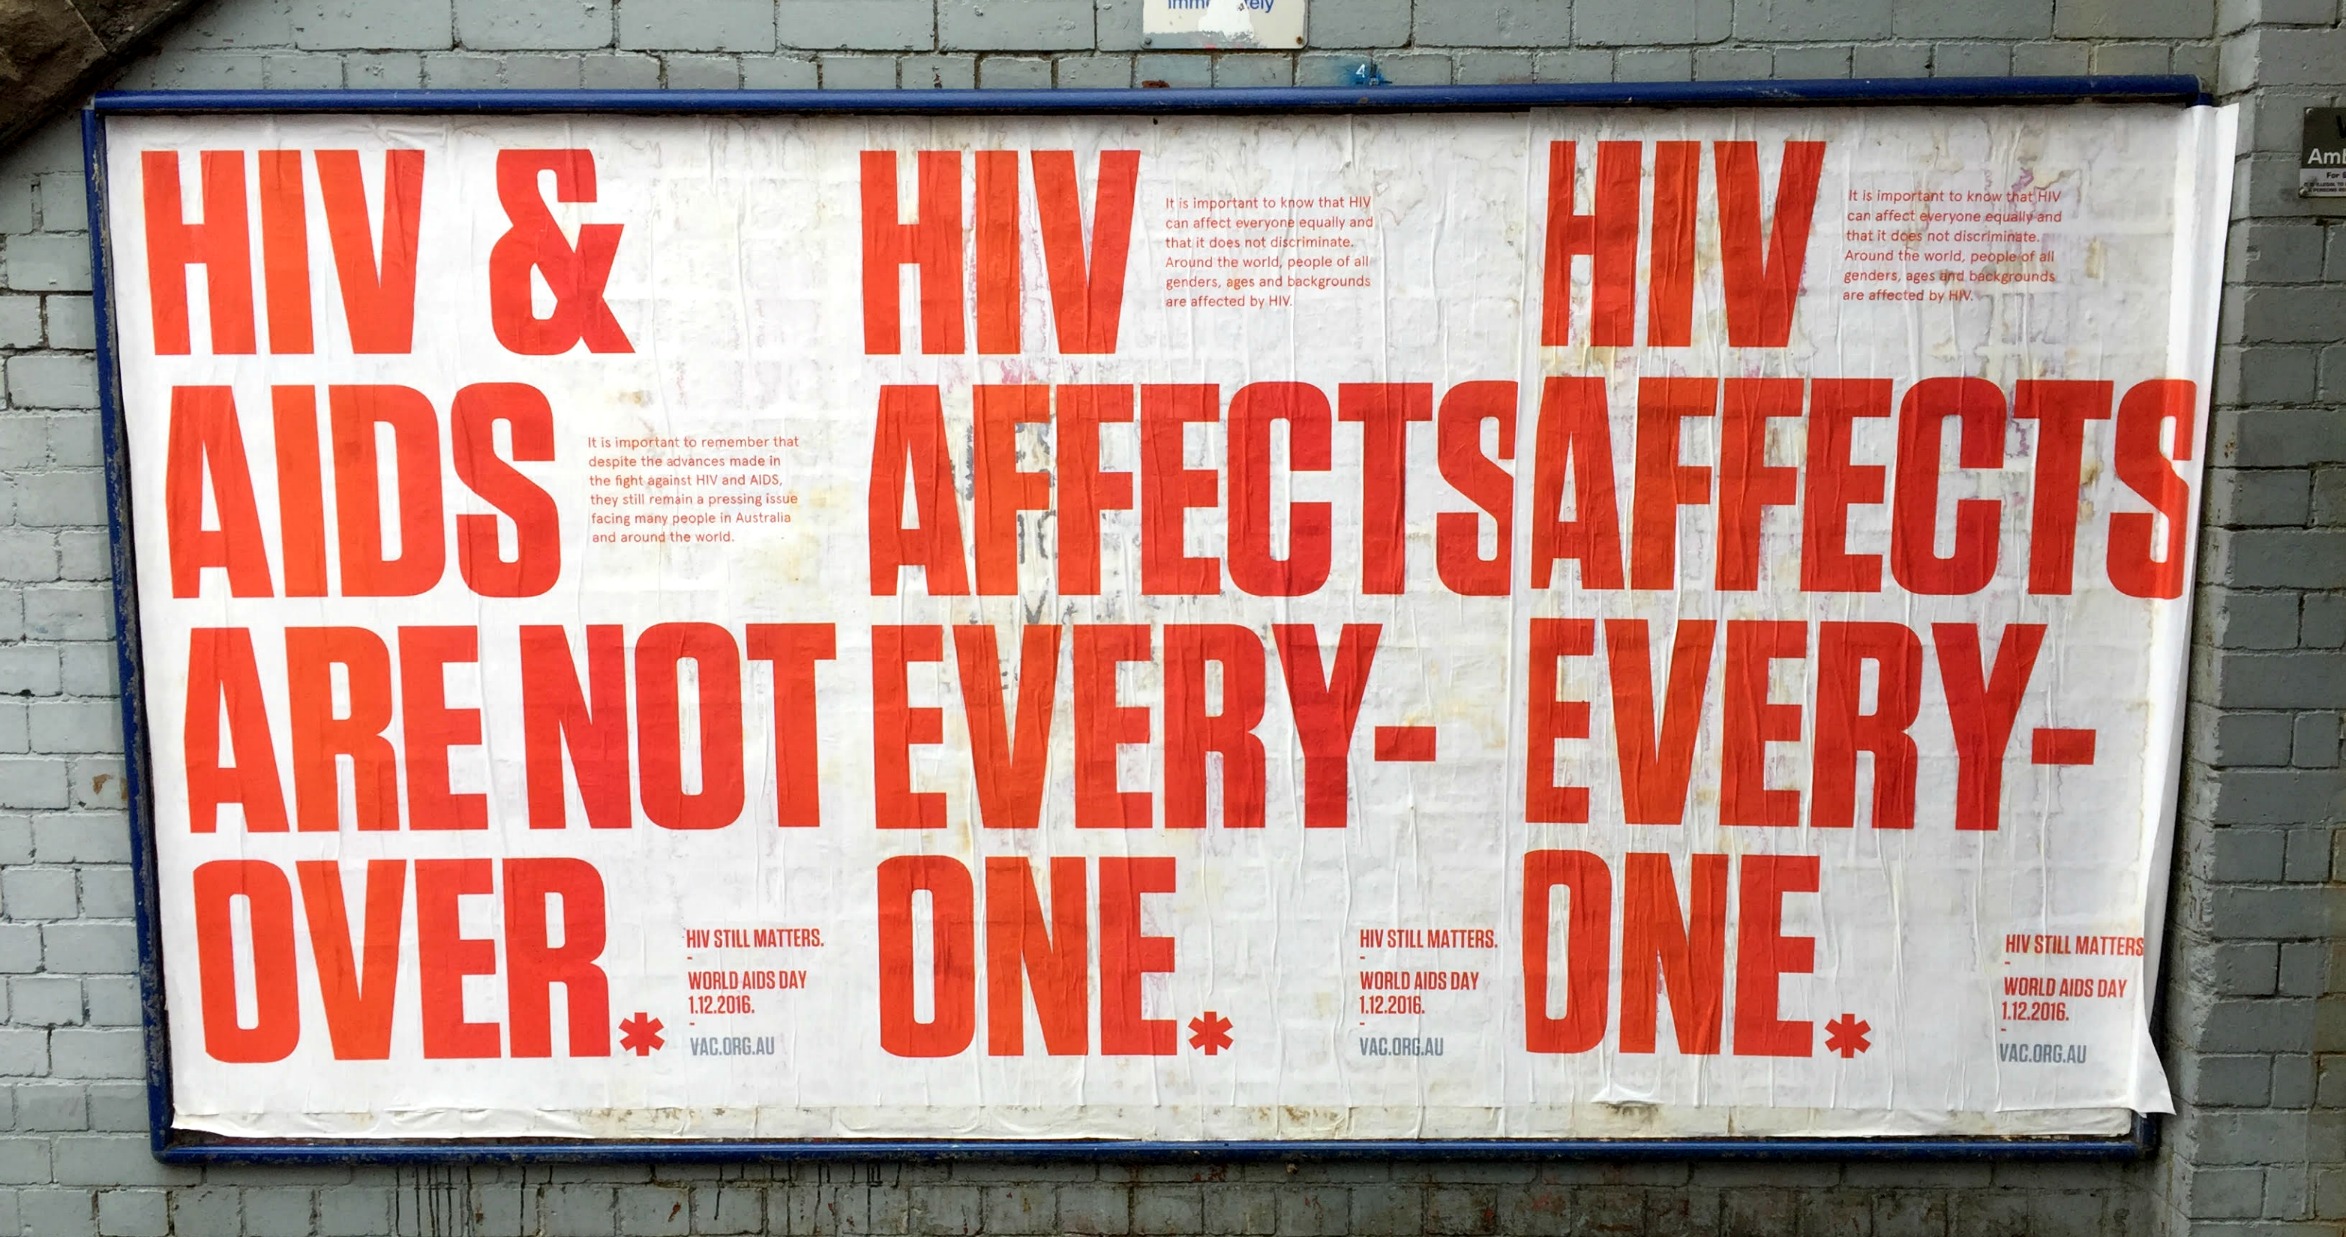 Victorian AIDS Council launches powerful new campaign